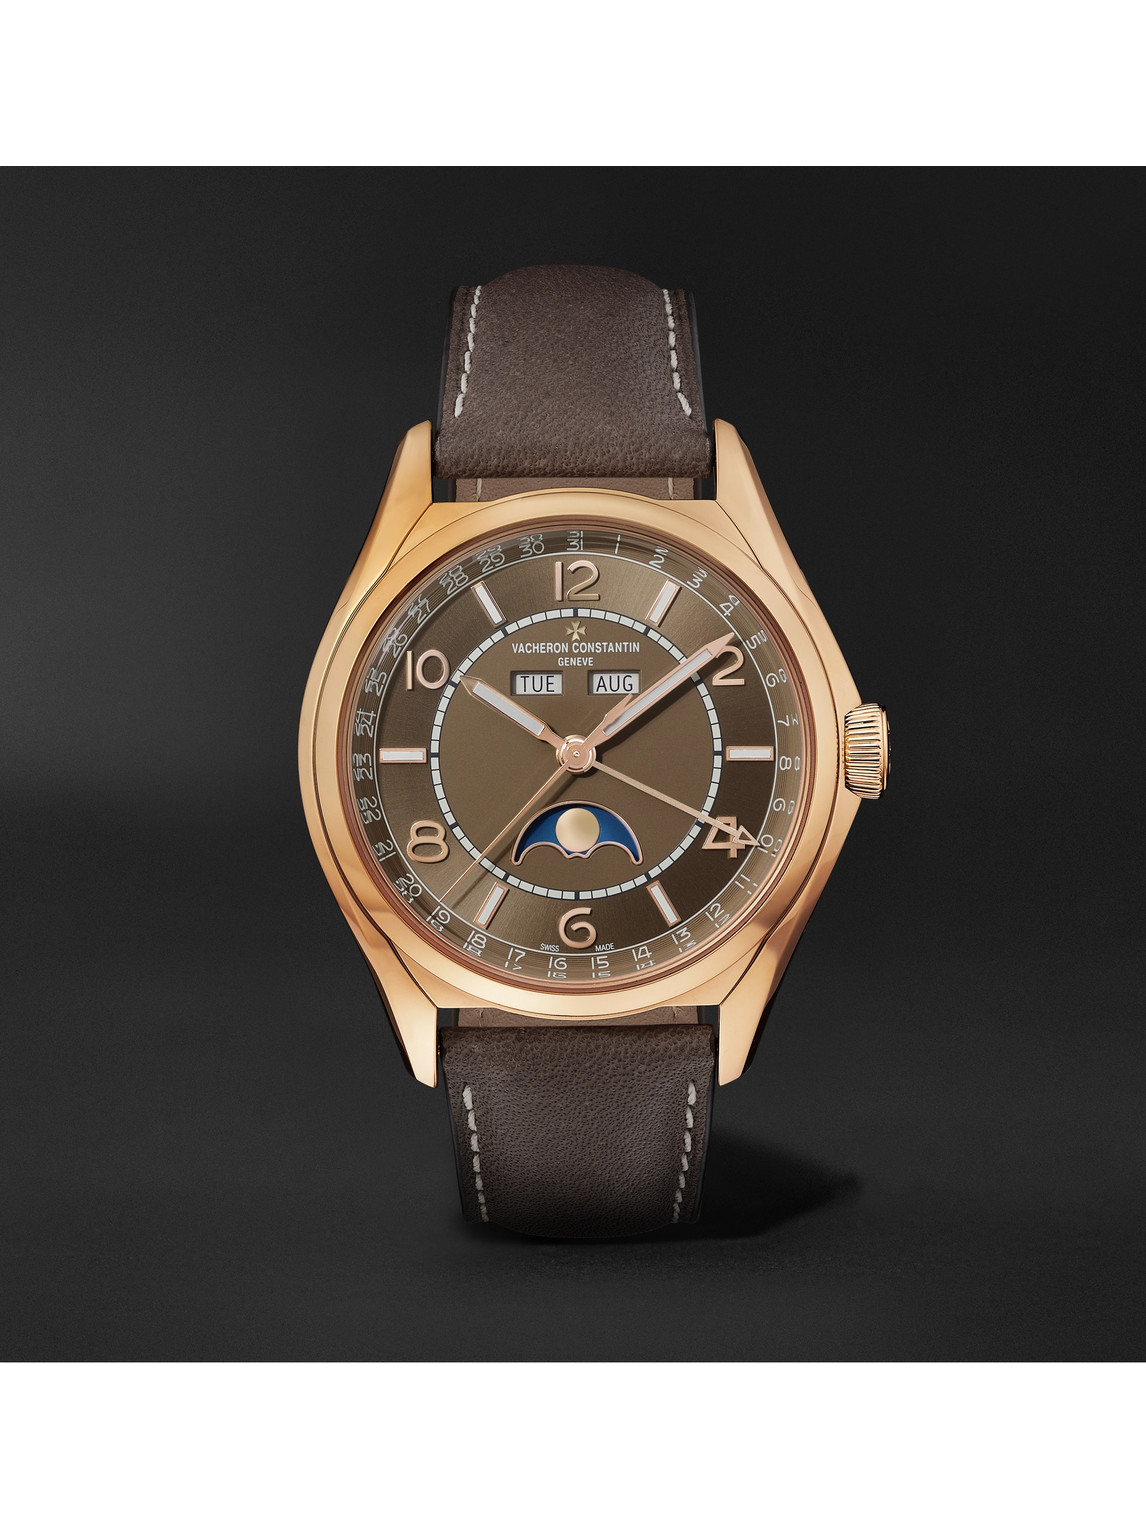 Fiftysix Complete Calendar Automatic 40mm 18-Karat Pink Gold and Leather Watch, Ref. No. 4000E/000R-B065